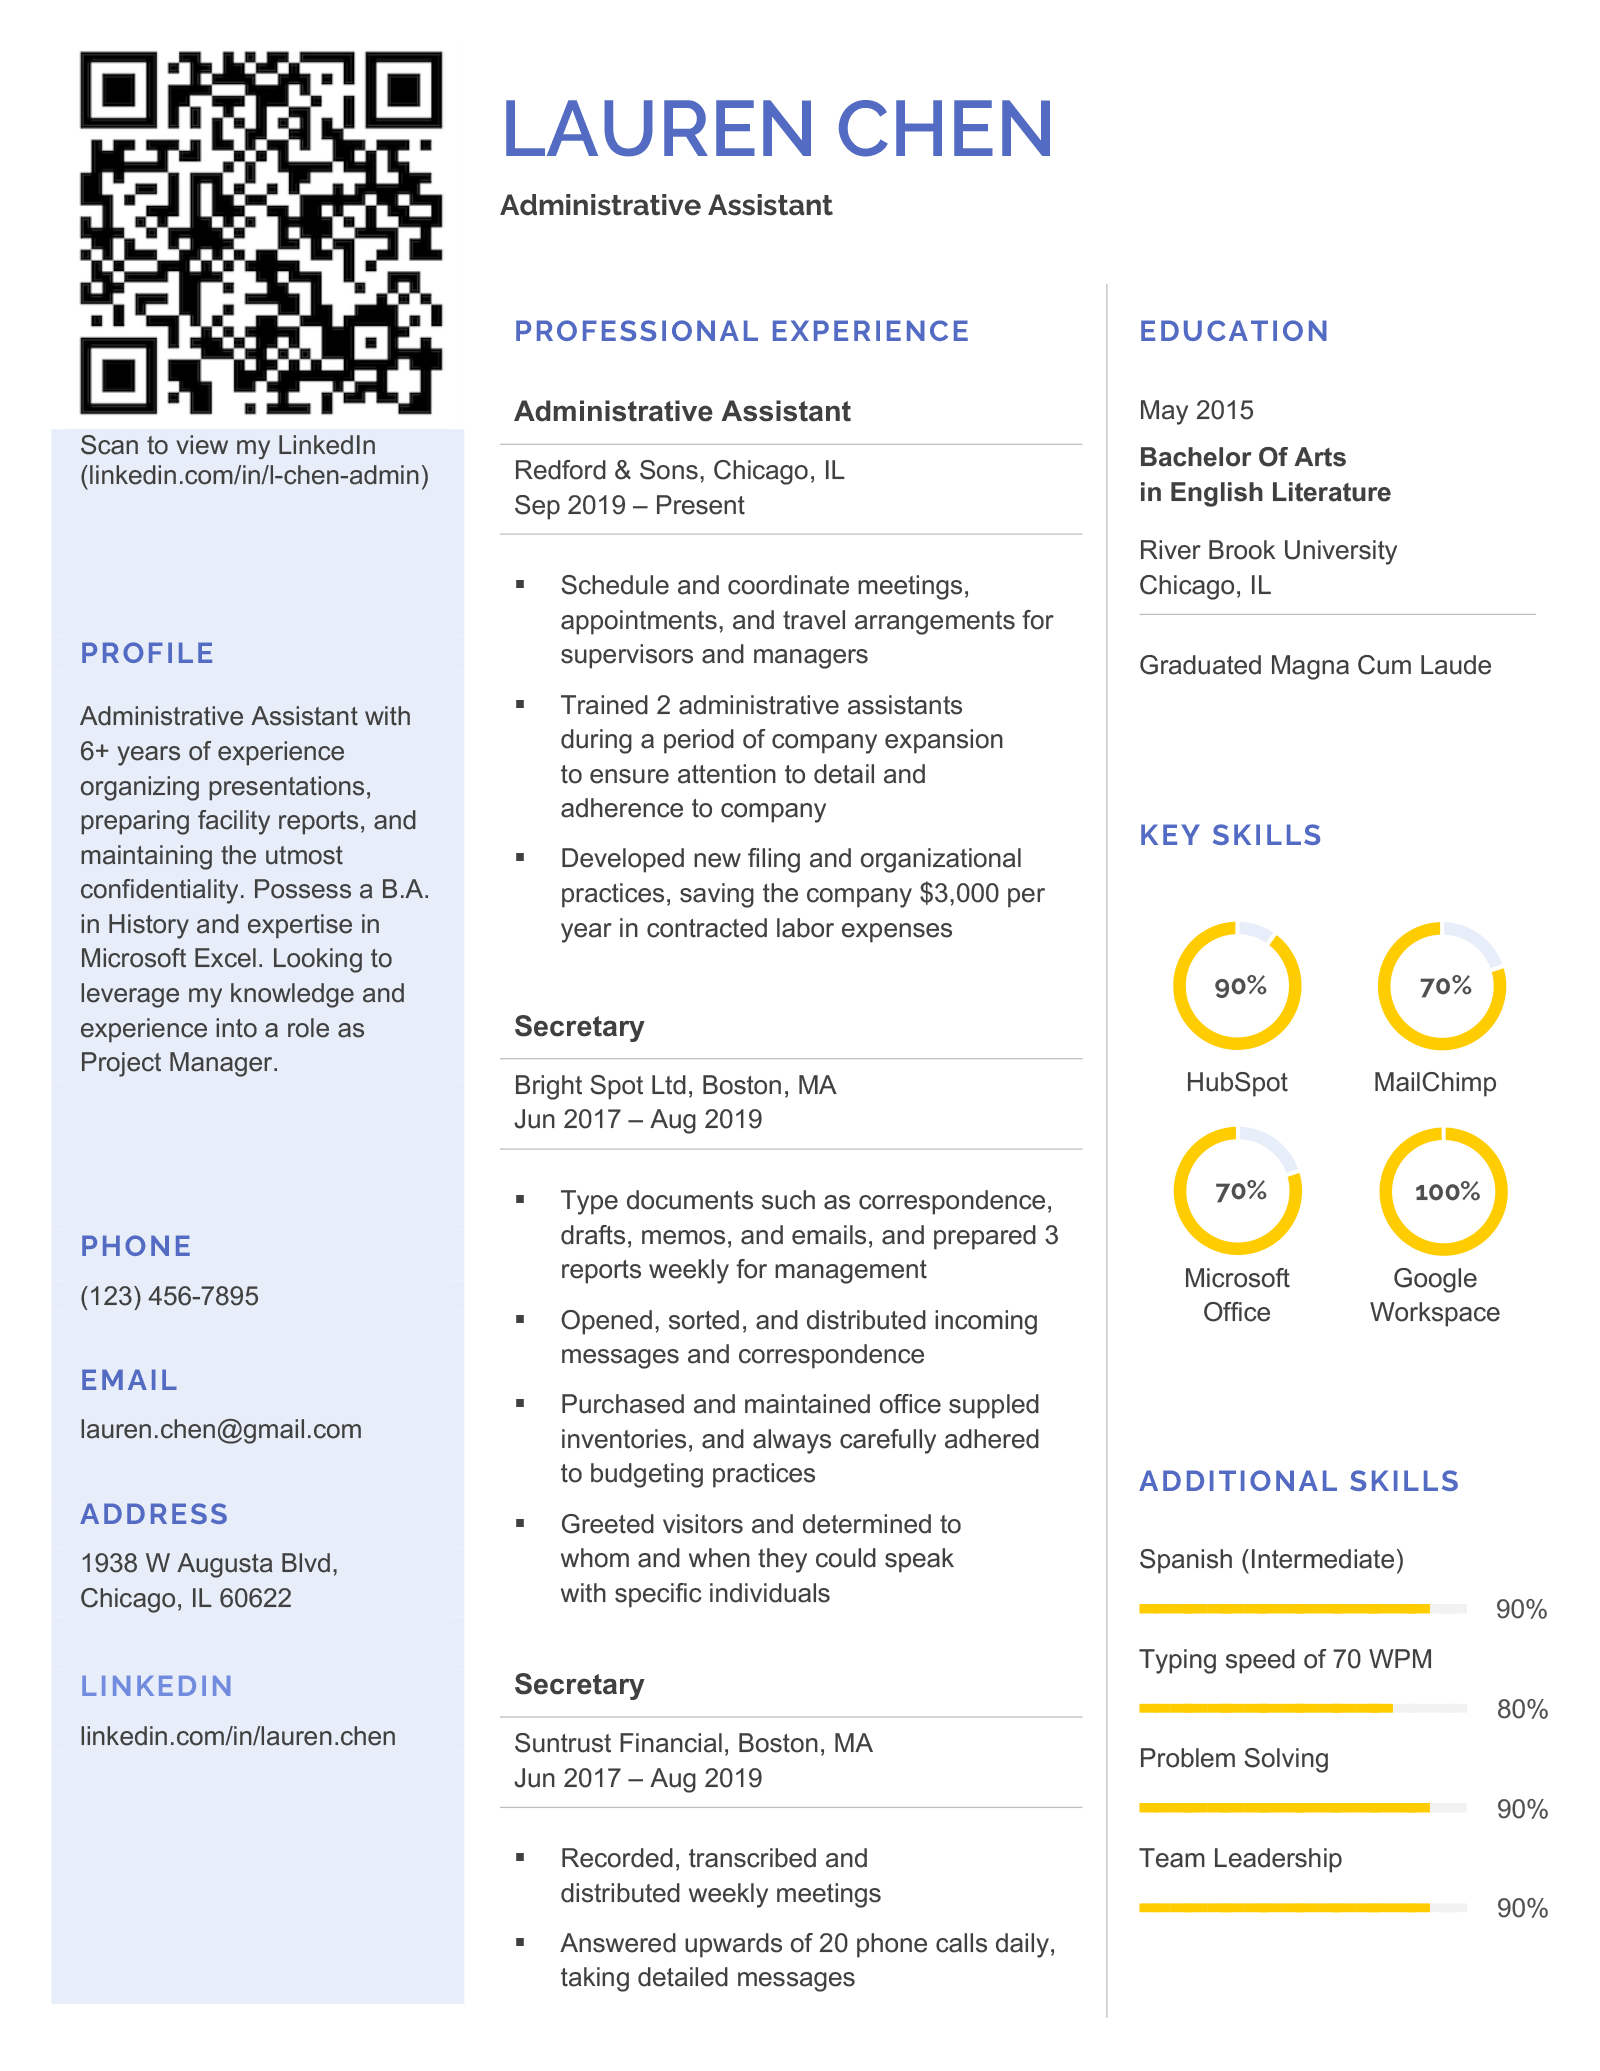 A resume template with a LinkedIn QR code in the top left corner, next to the applicant's name